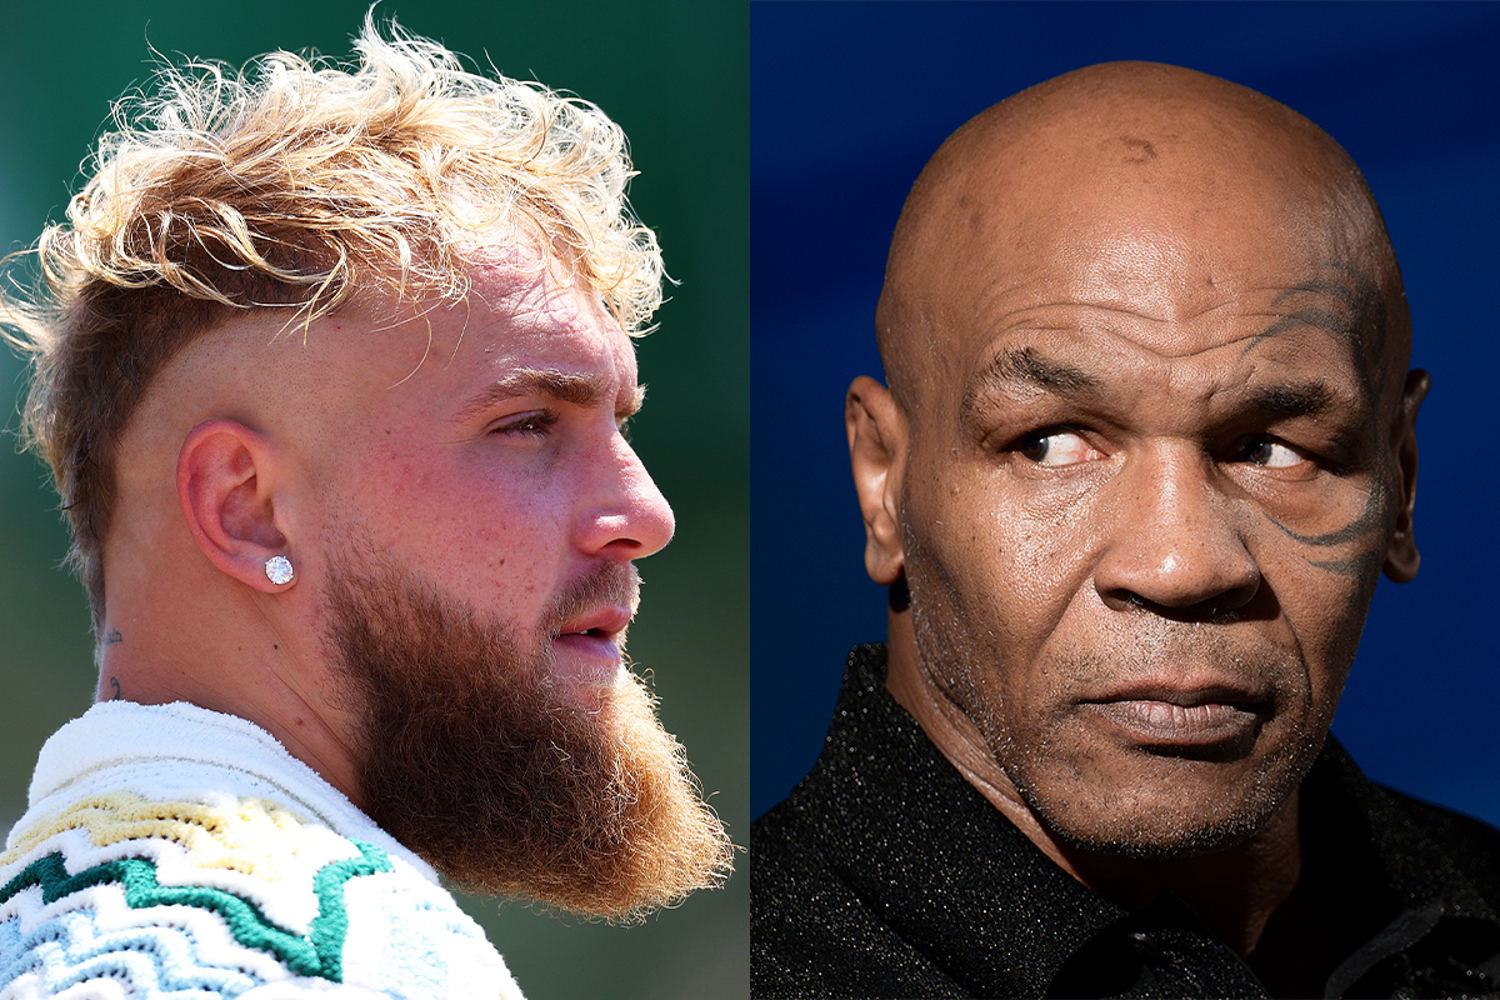 Jake Paul vs. Mike Tyson on July 20 to be a sanctioned pro boxing match